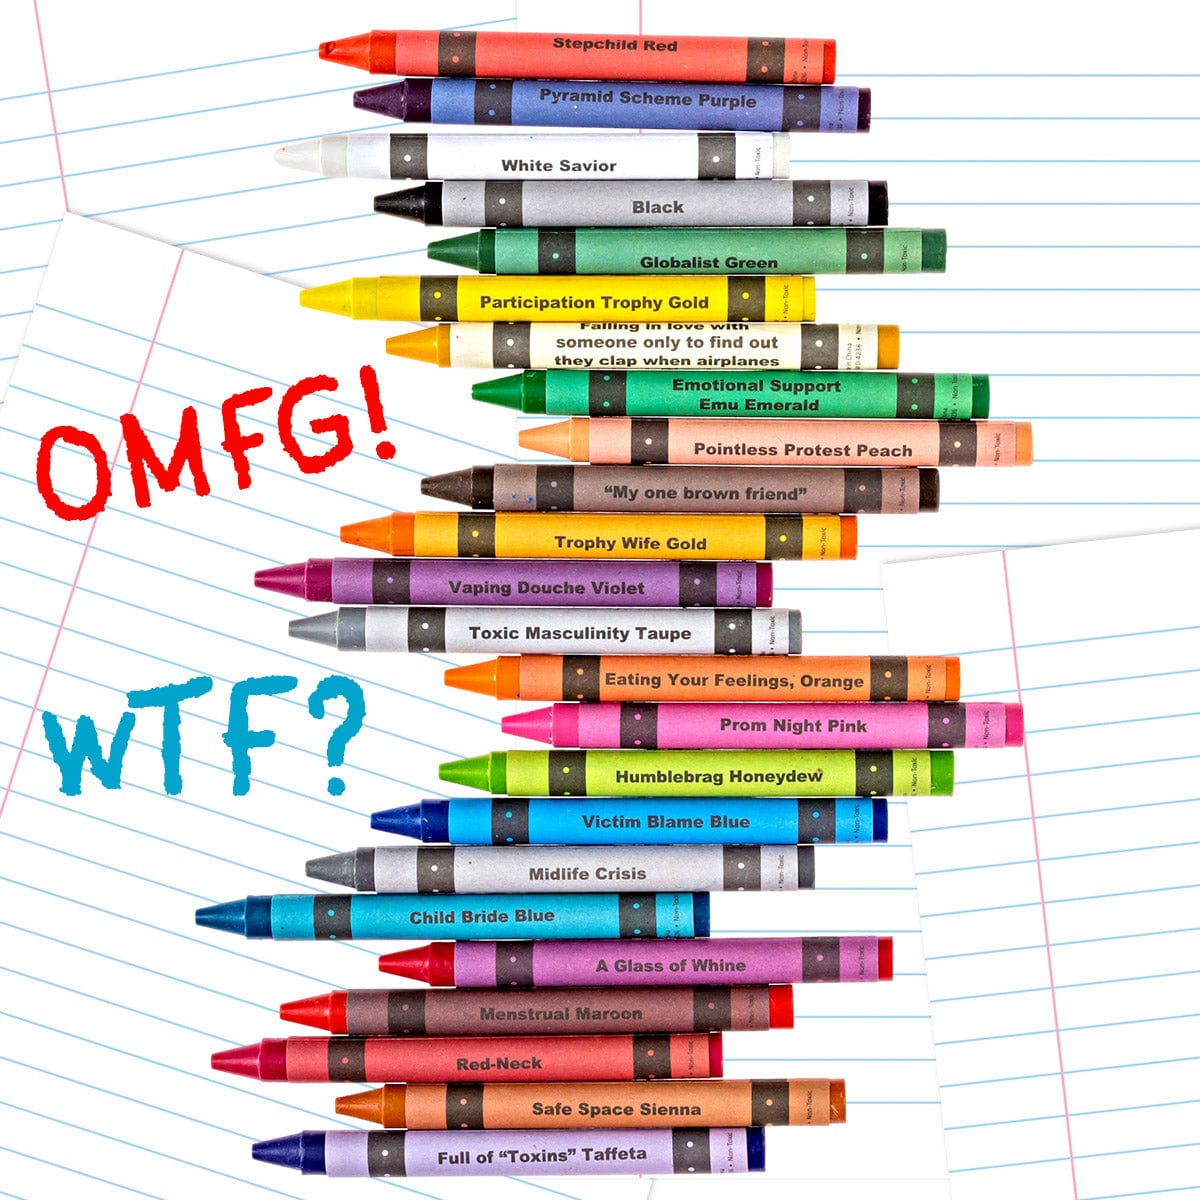 Wholesale Political Offensive Crayons: Red, White, and F*ck You